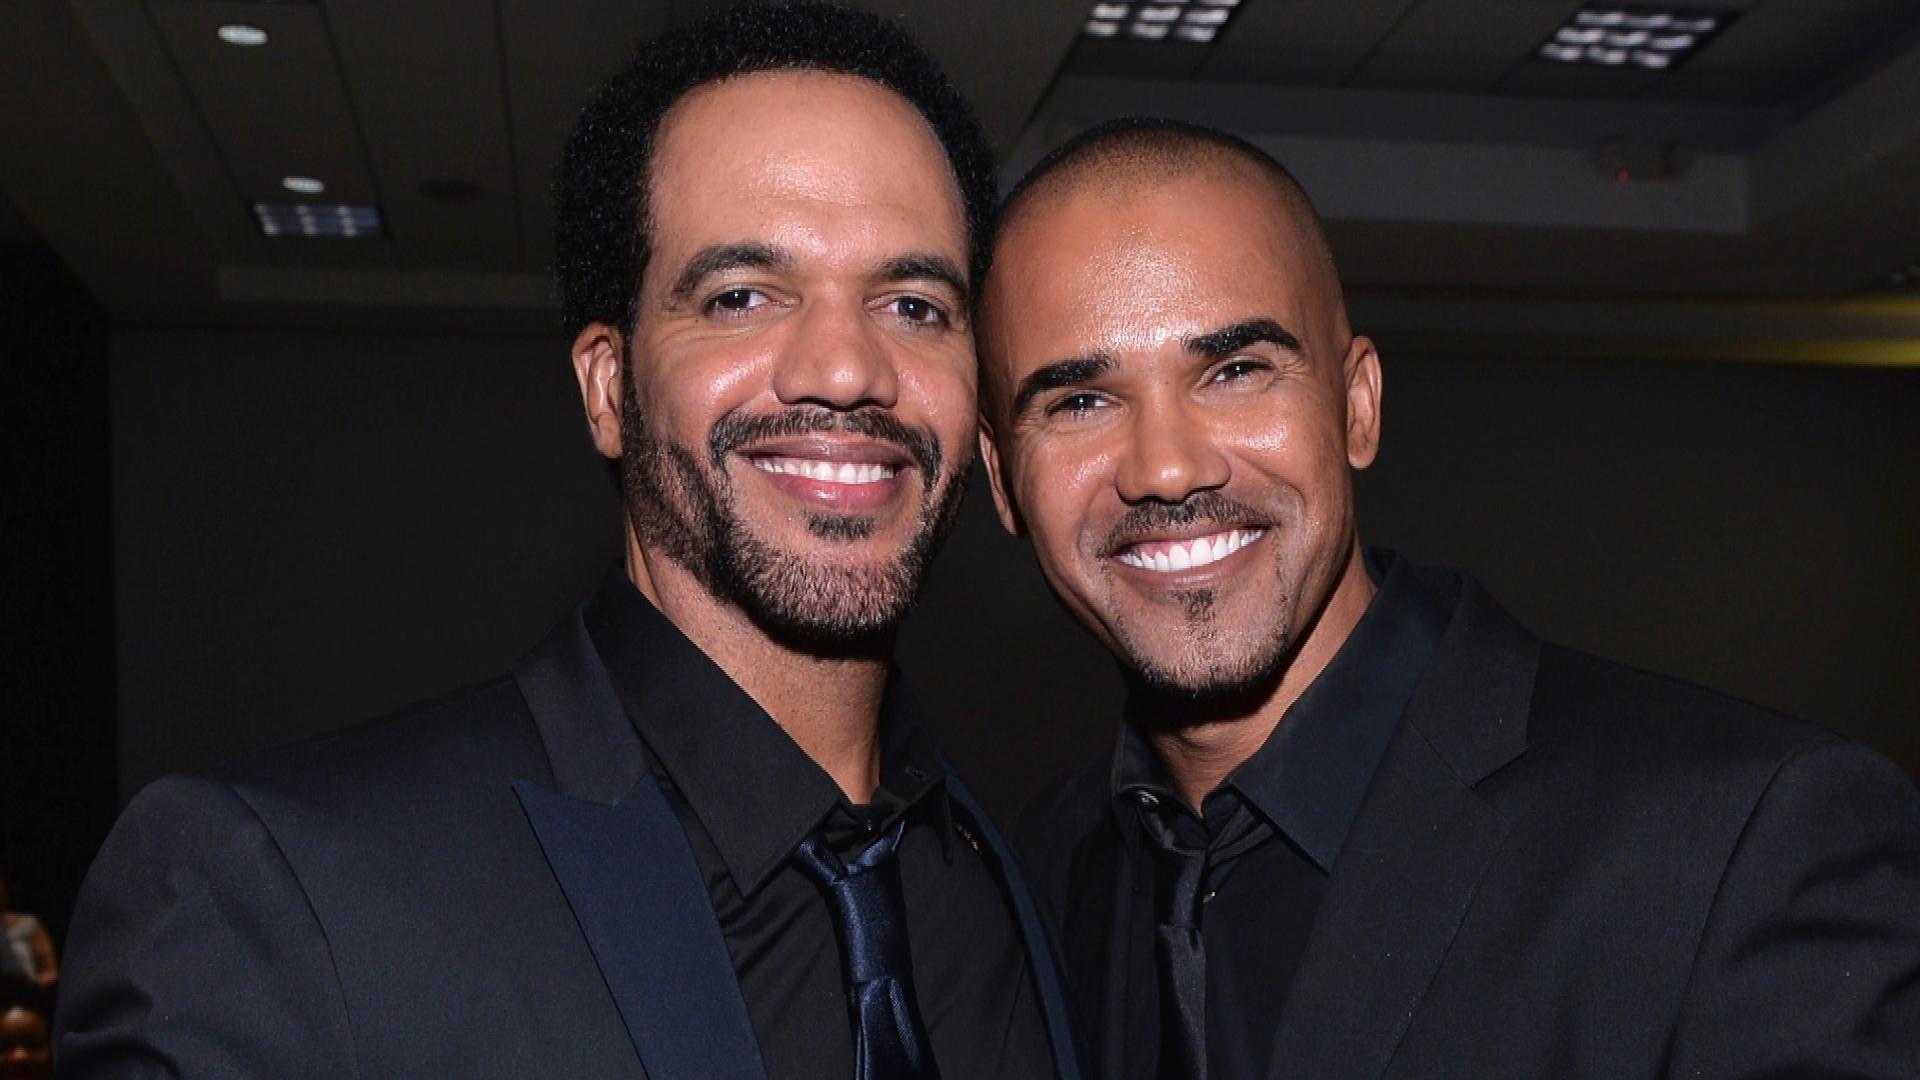 Kristoff St. John's Co Stars And Friends React To His Sudden Death